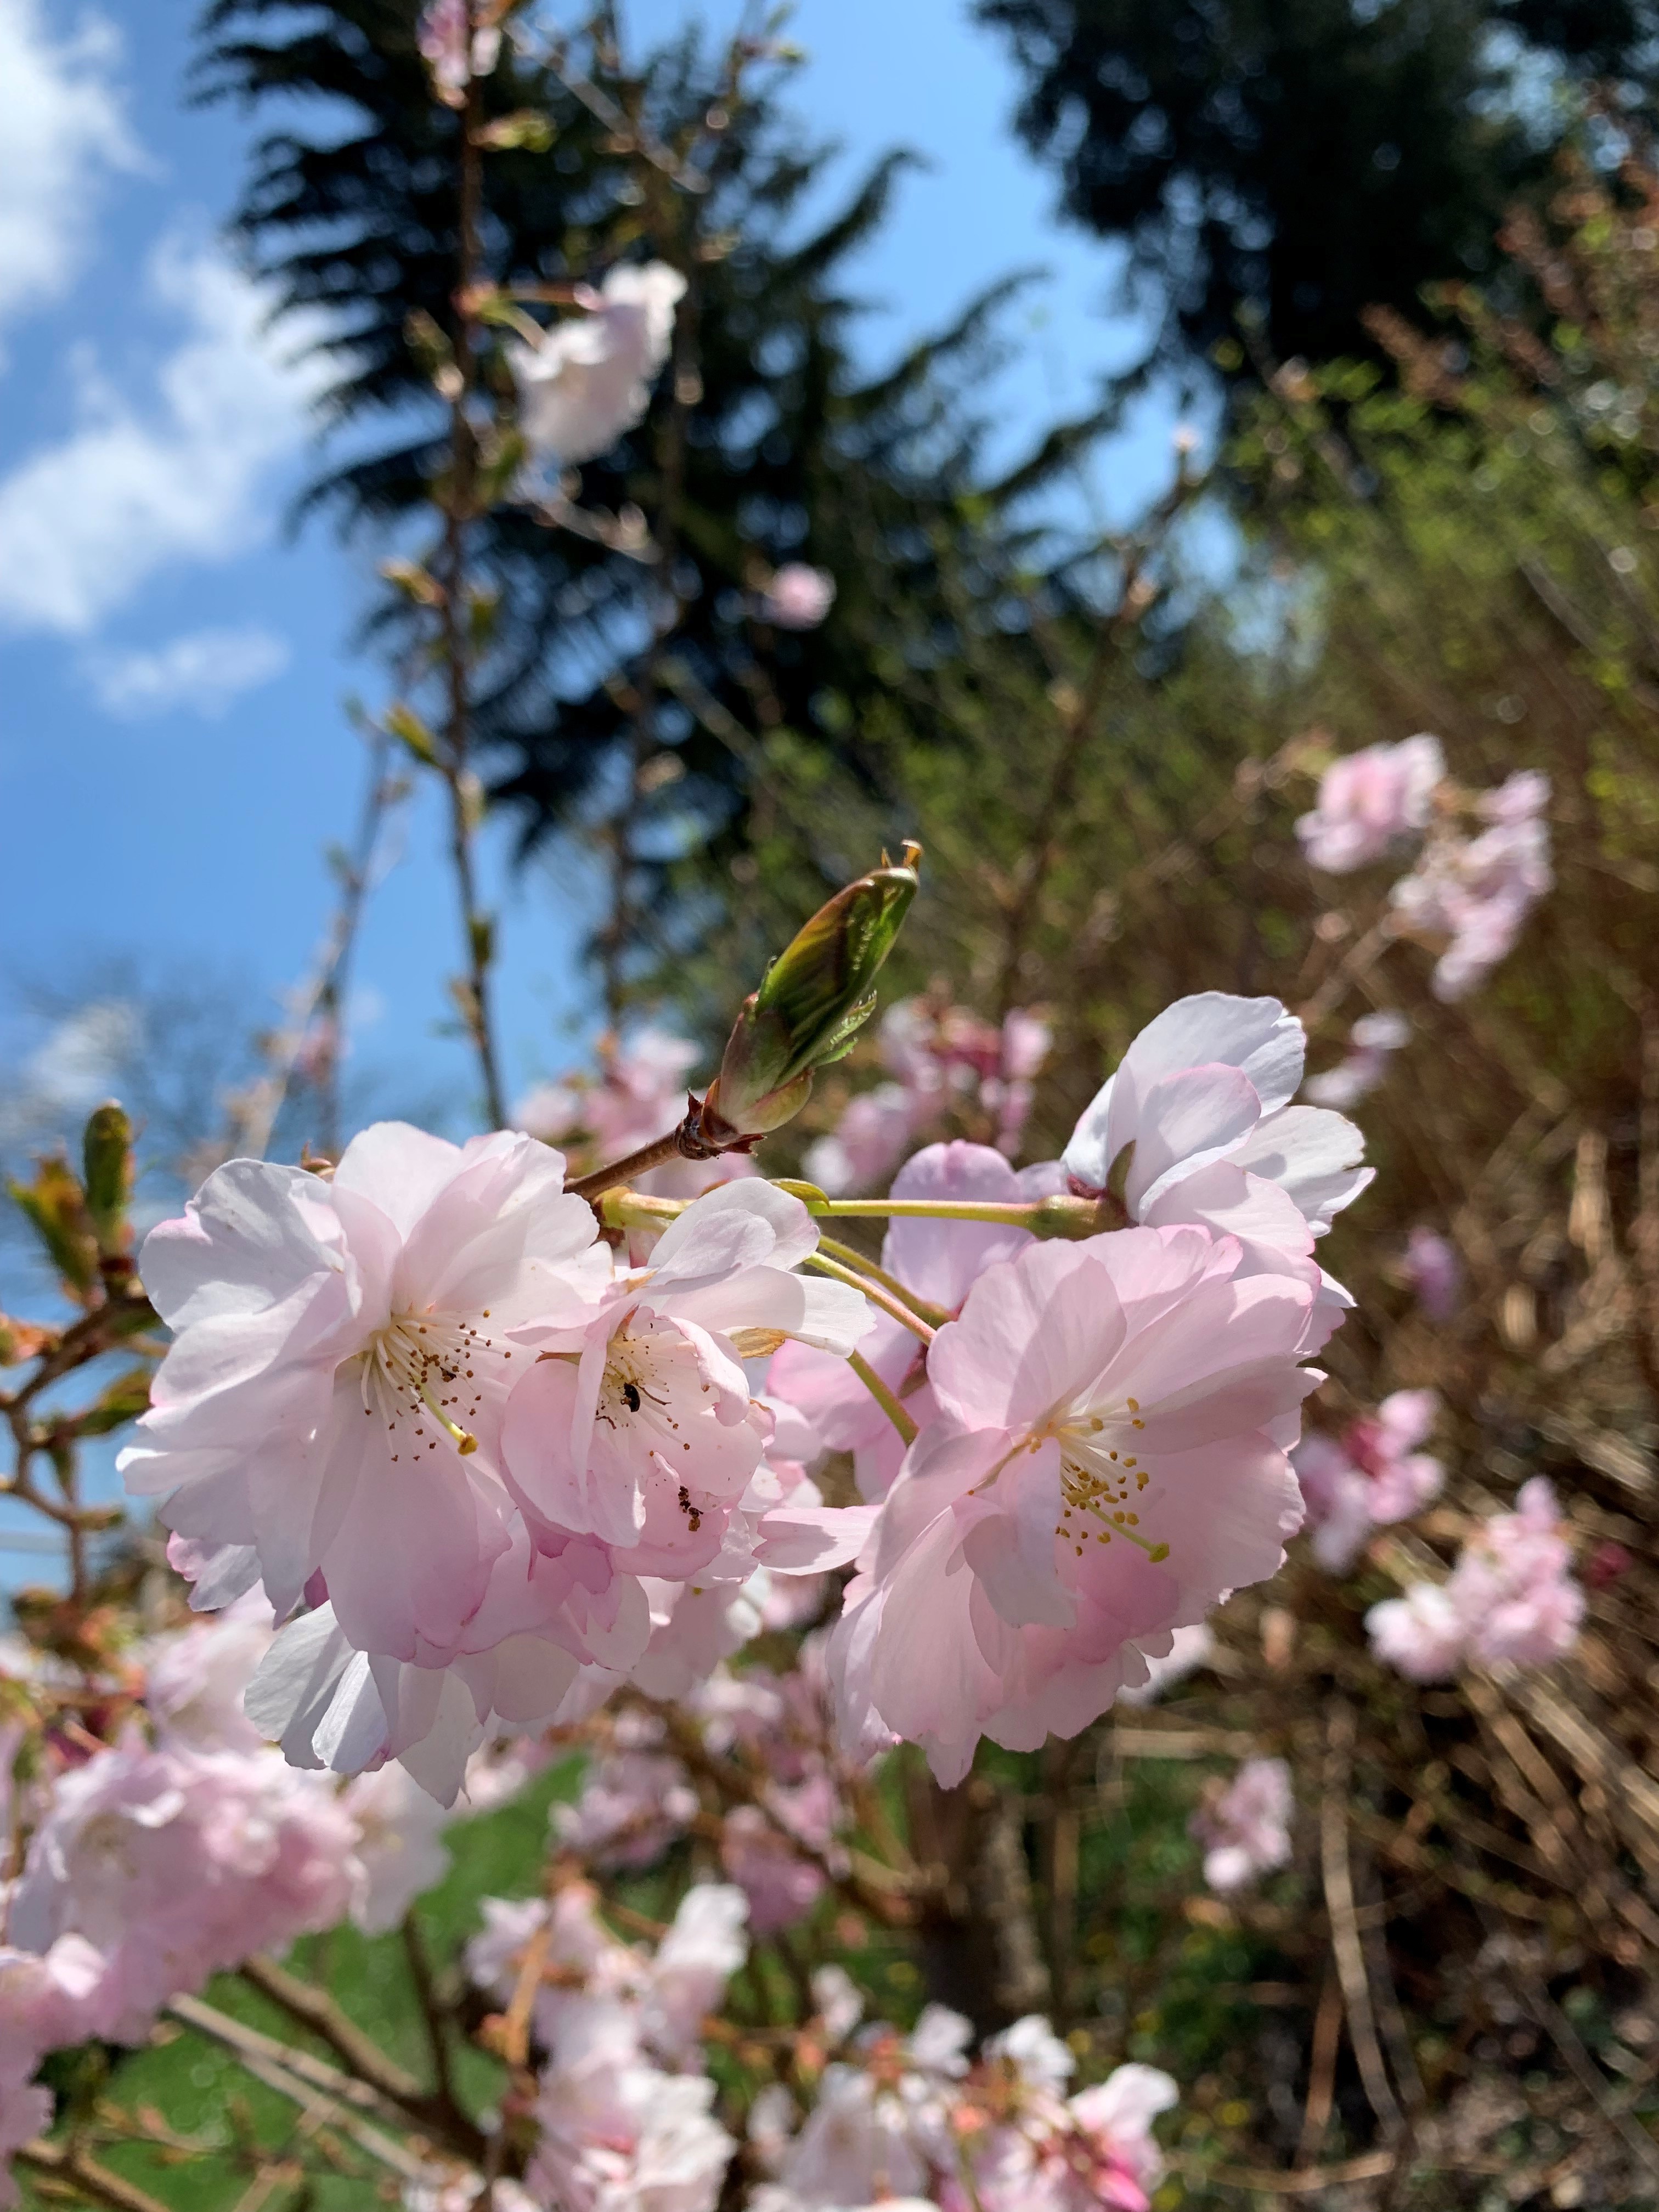 Close-up of a single-flowered pastel pink cherry blossom, with almost all flowers in bloom, and a couple of green buds